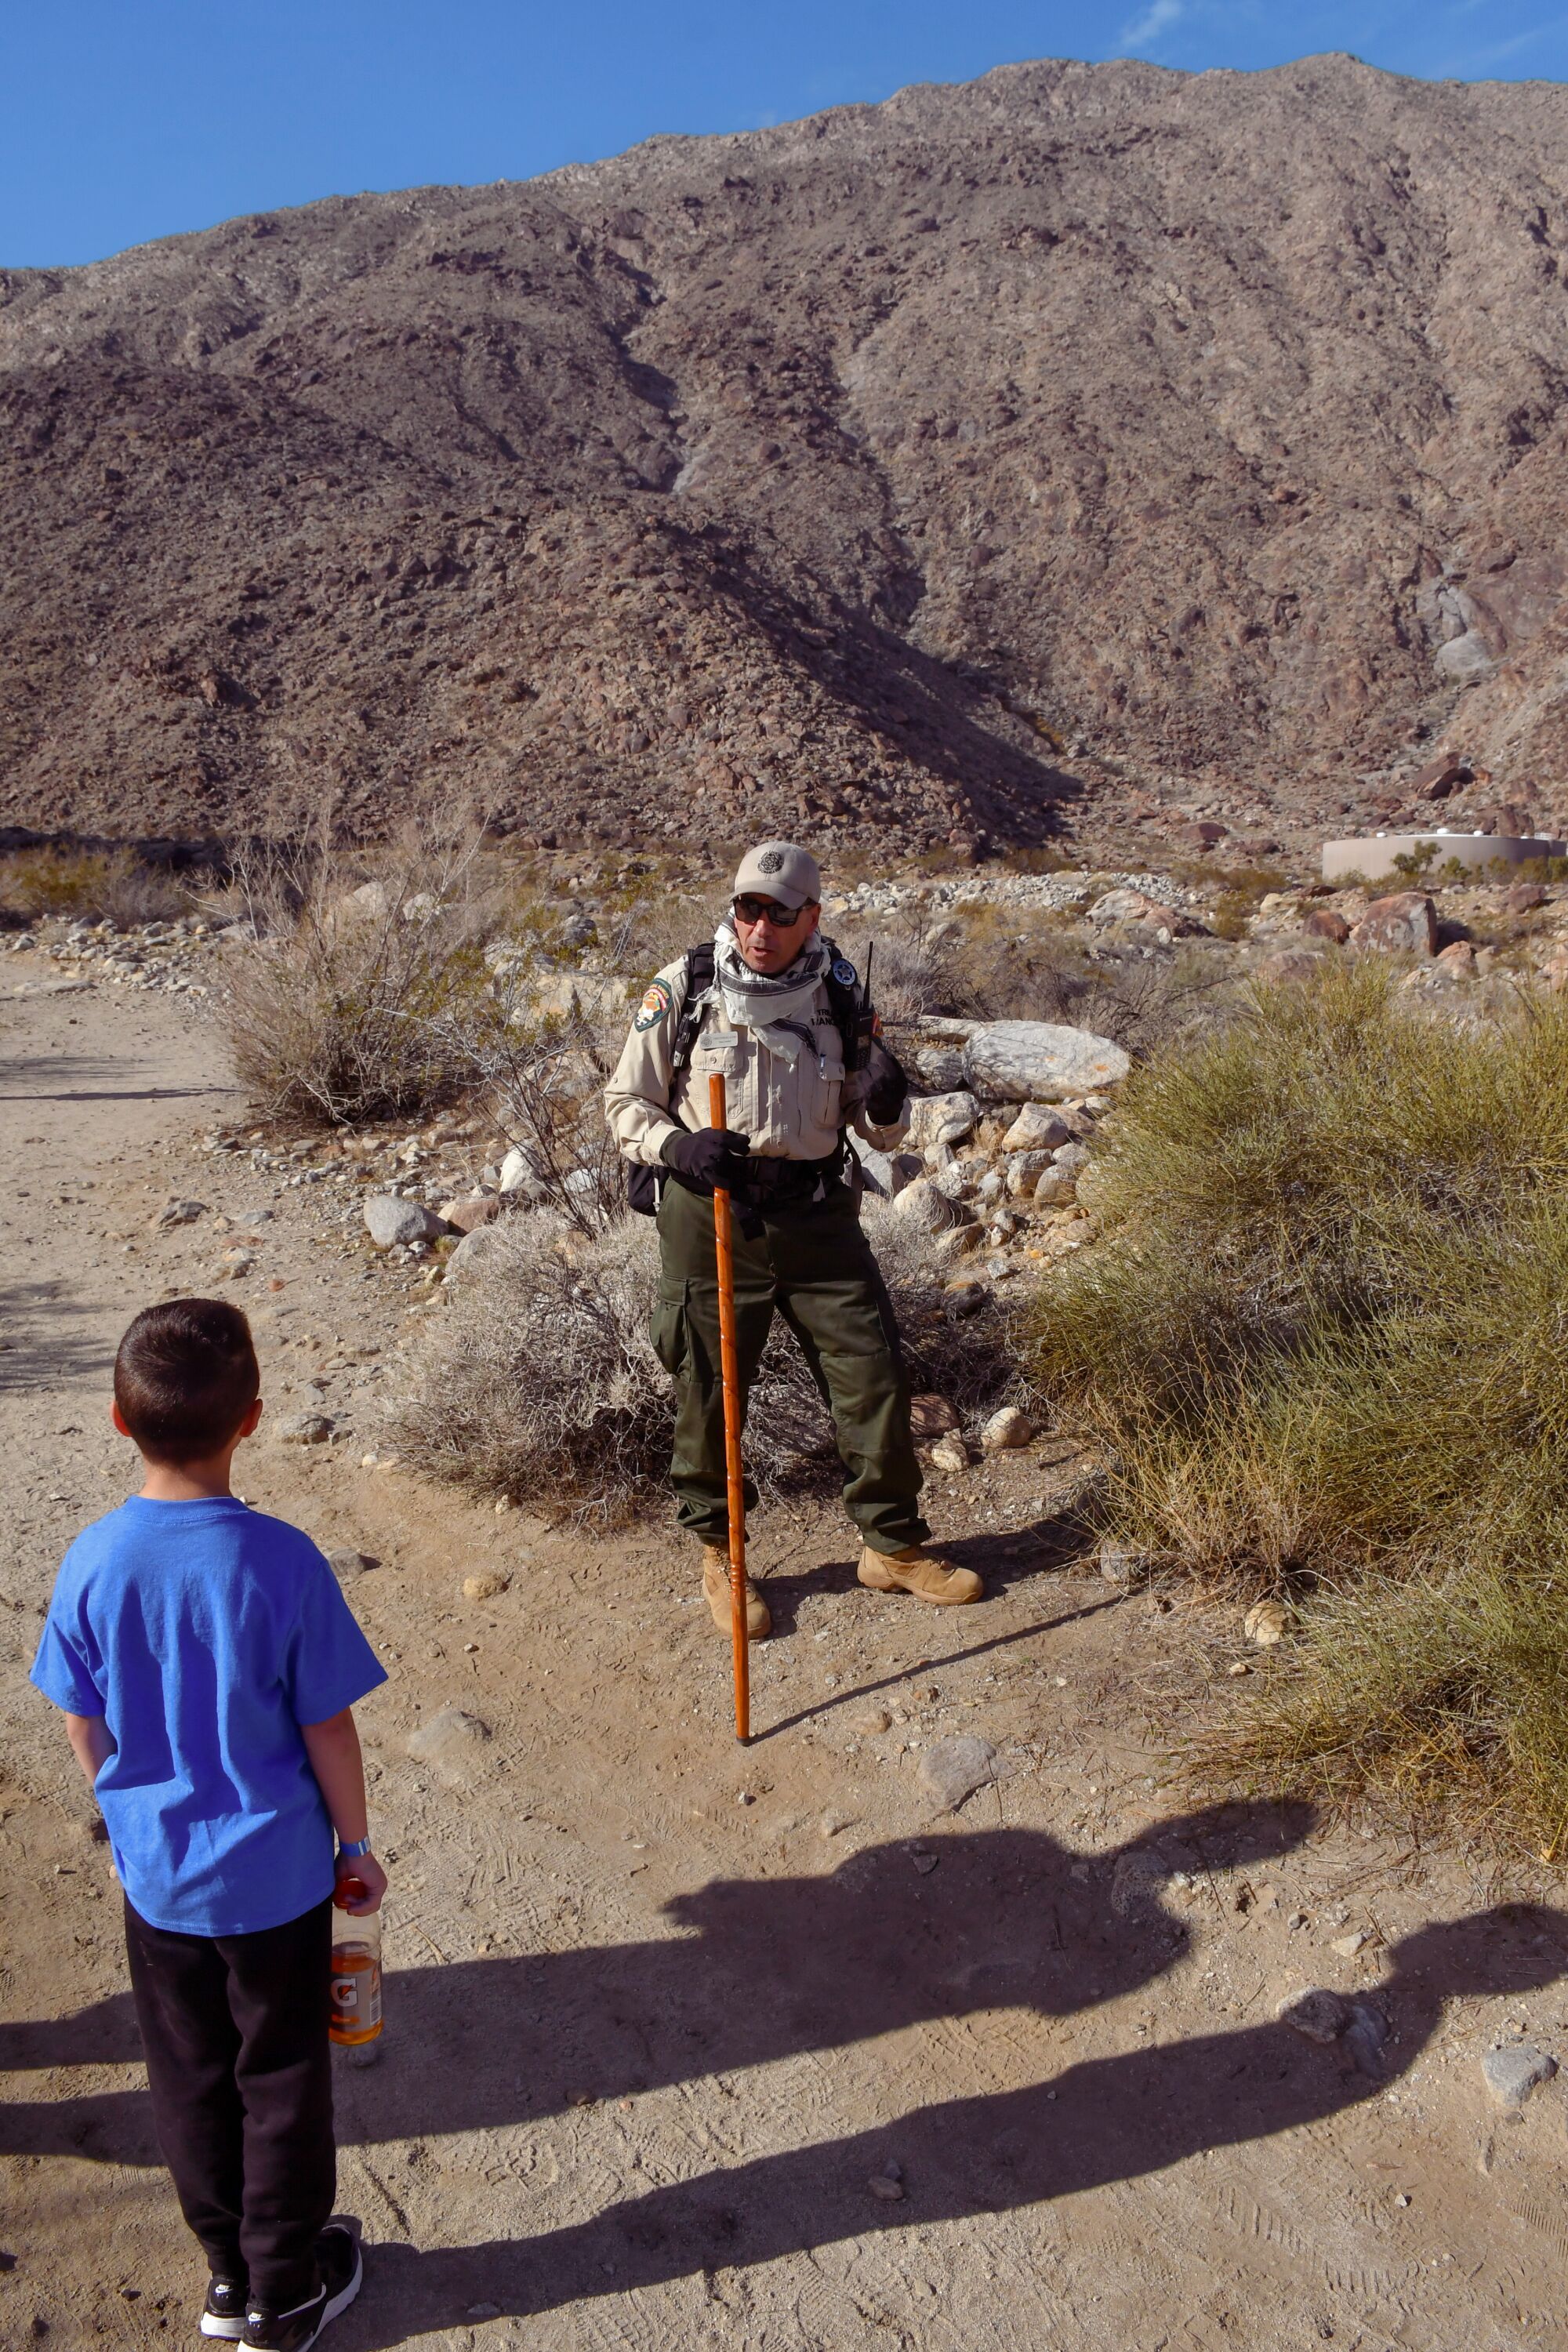 A ranger stands on a trail talking to a young boy.